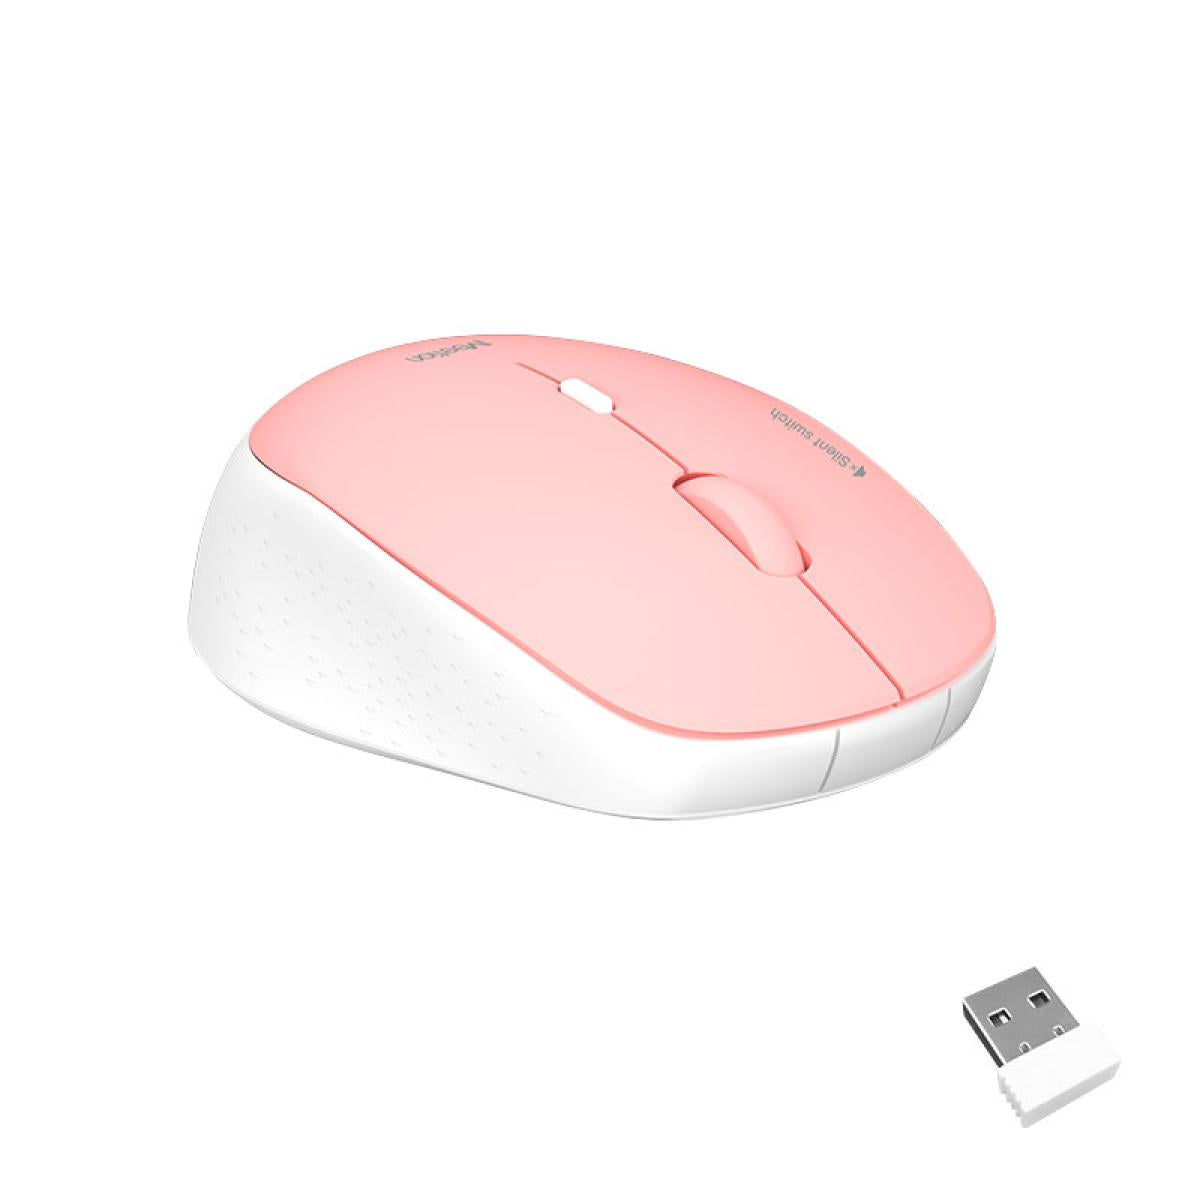 MeeTion 5 Colors Silent 2.4ghz Wireless Mouse